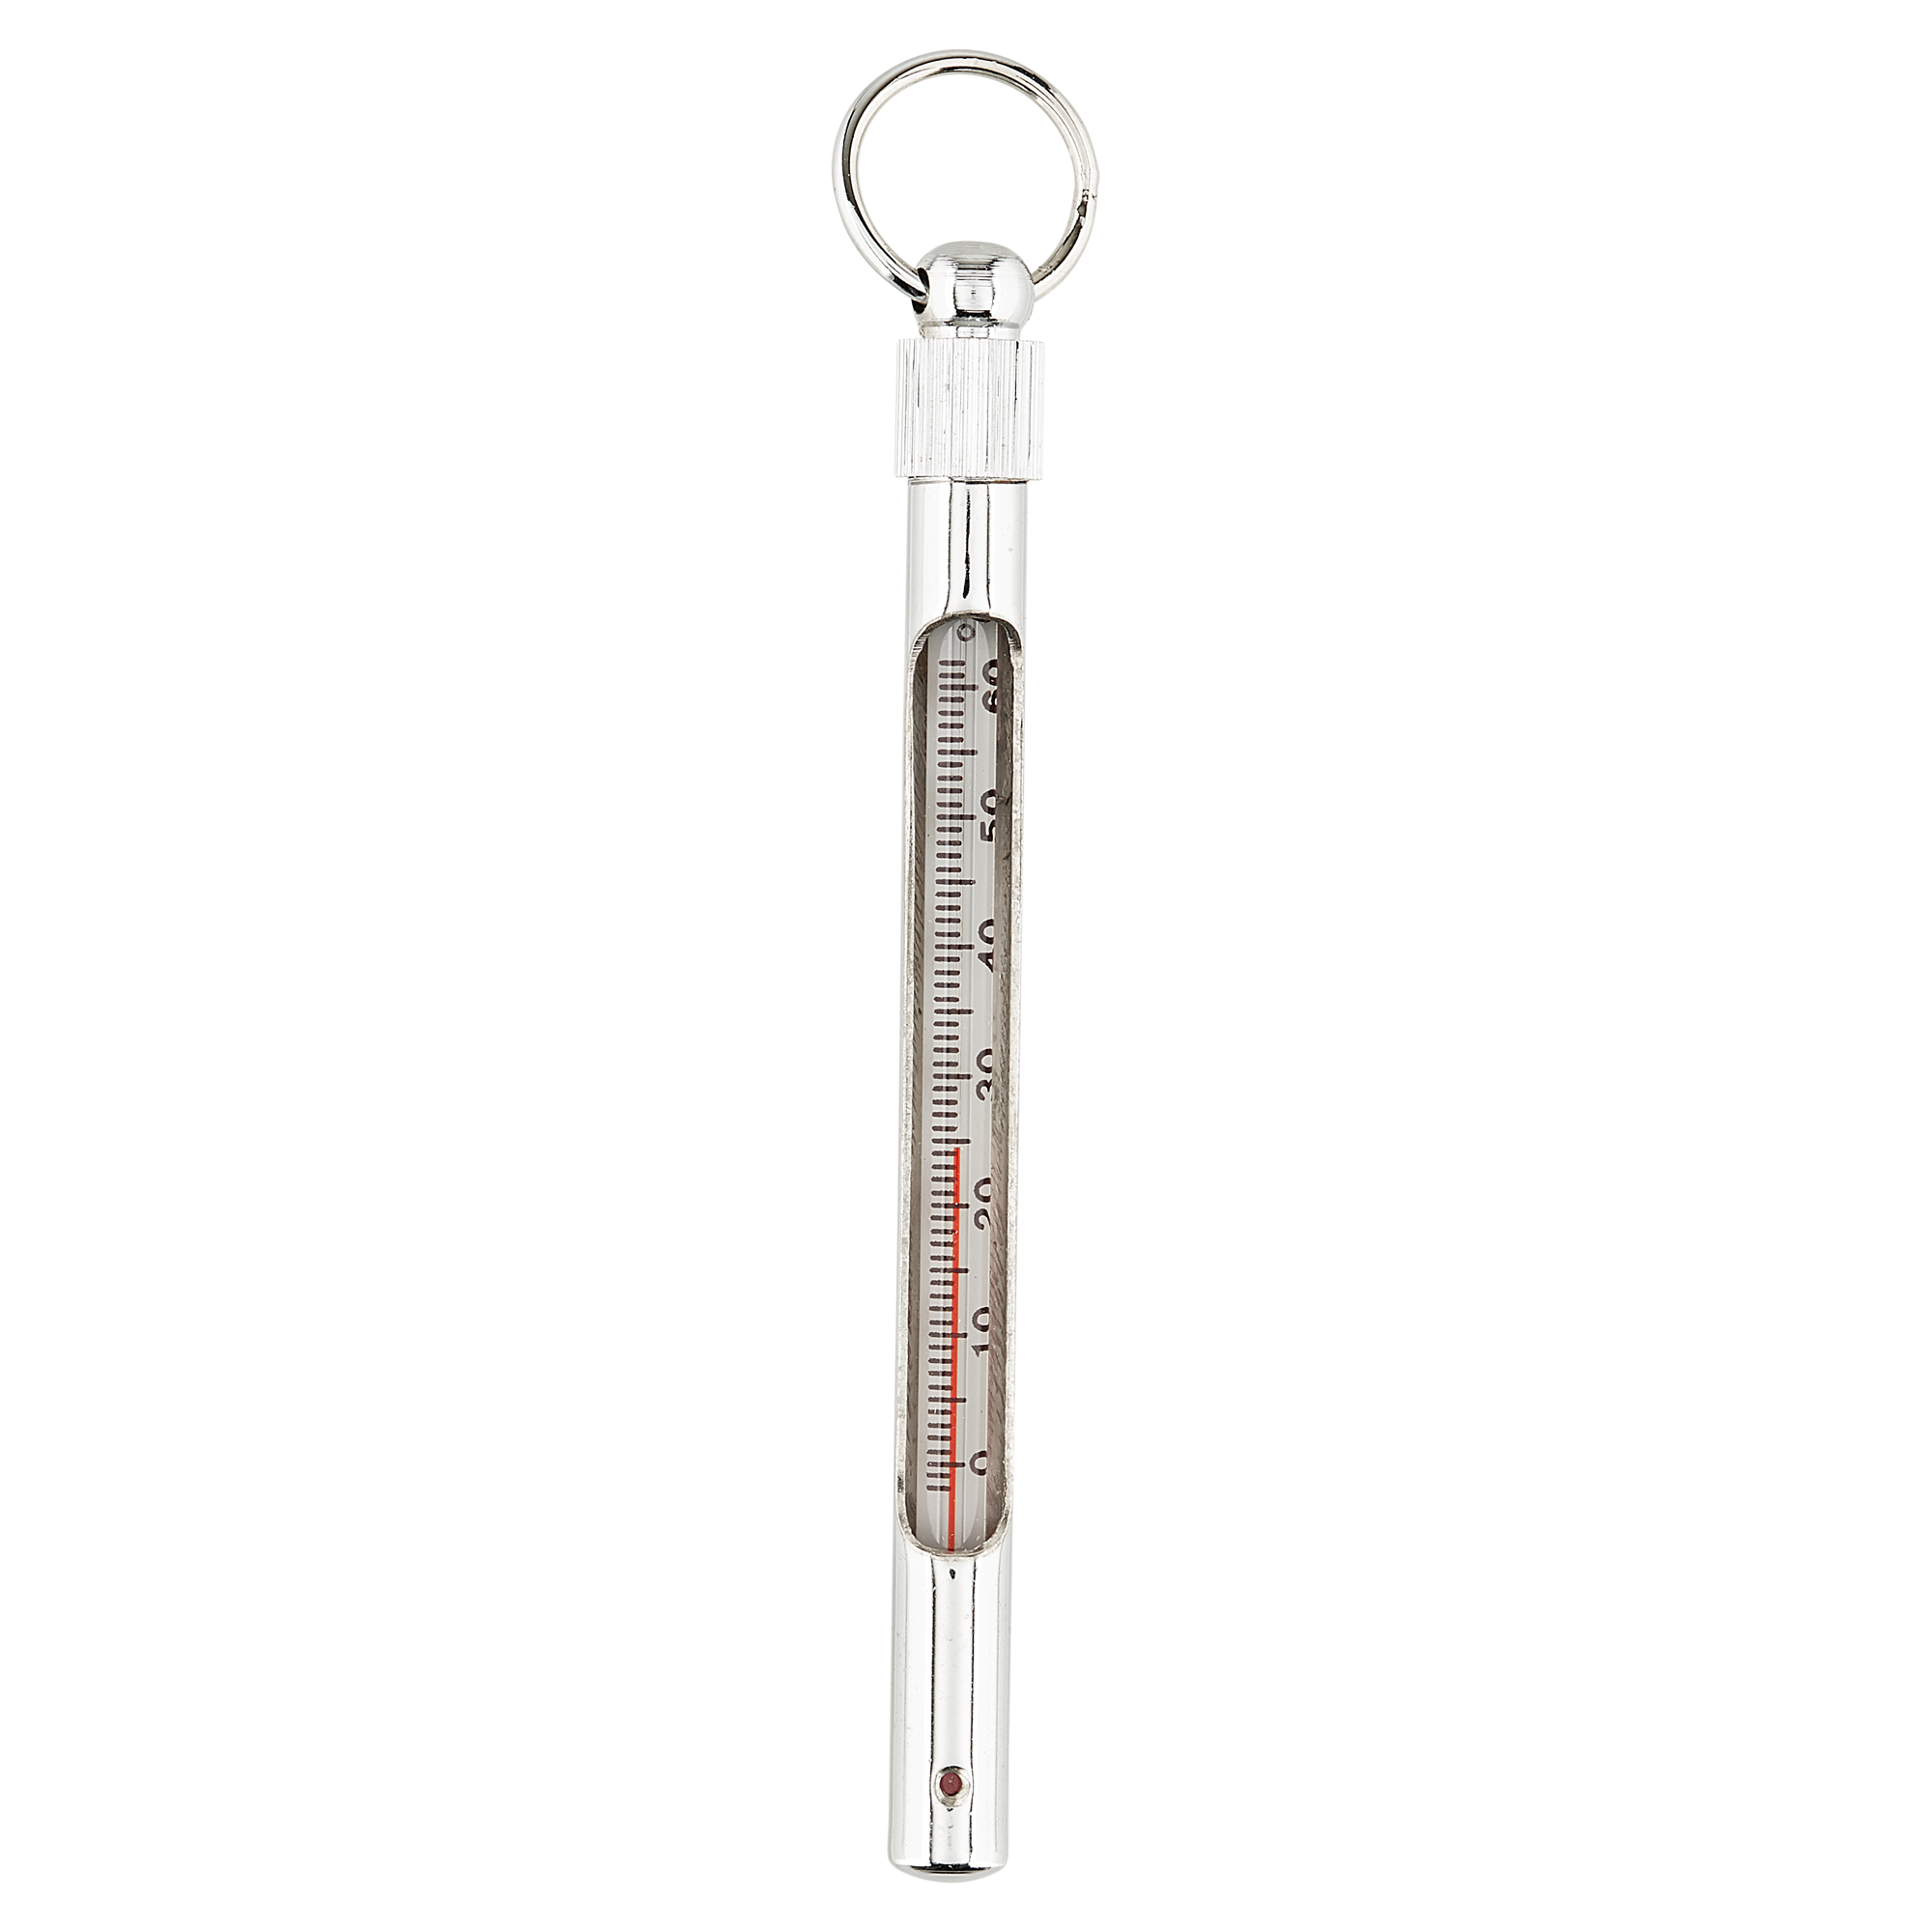 Wasserthermometer bis 60 °C + product picture